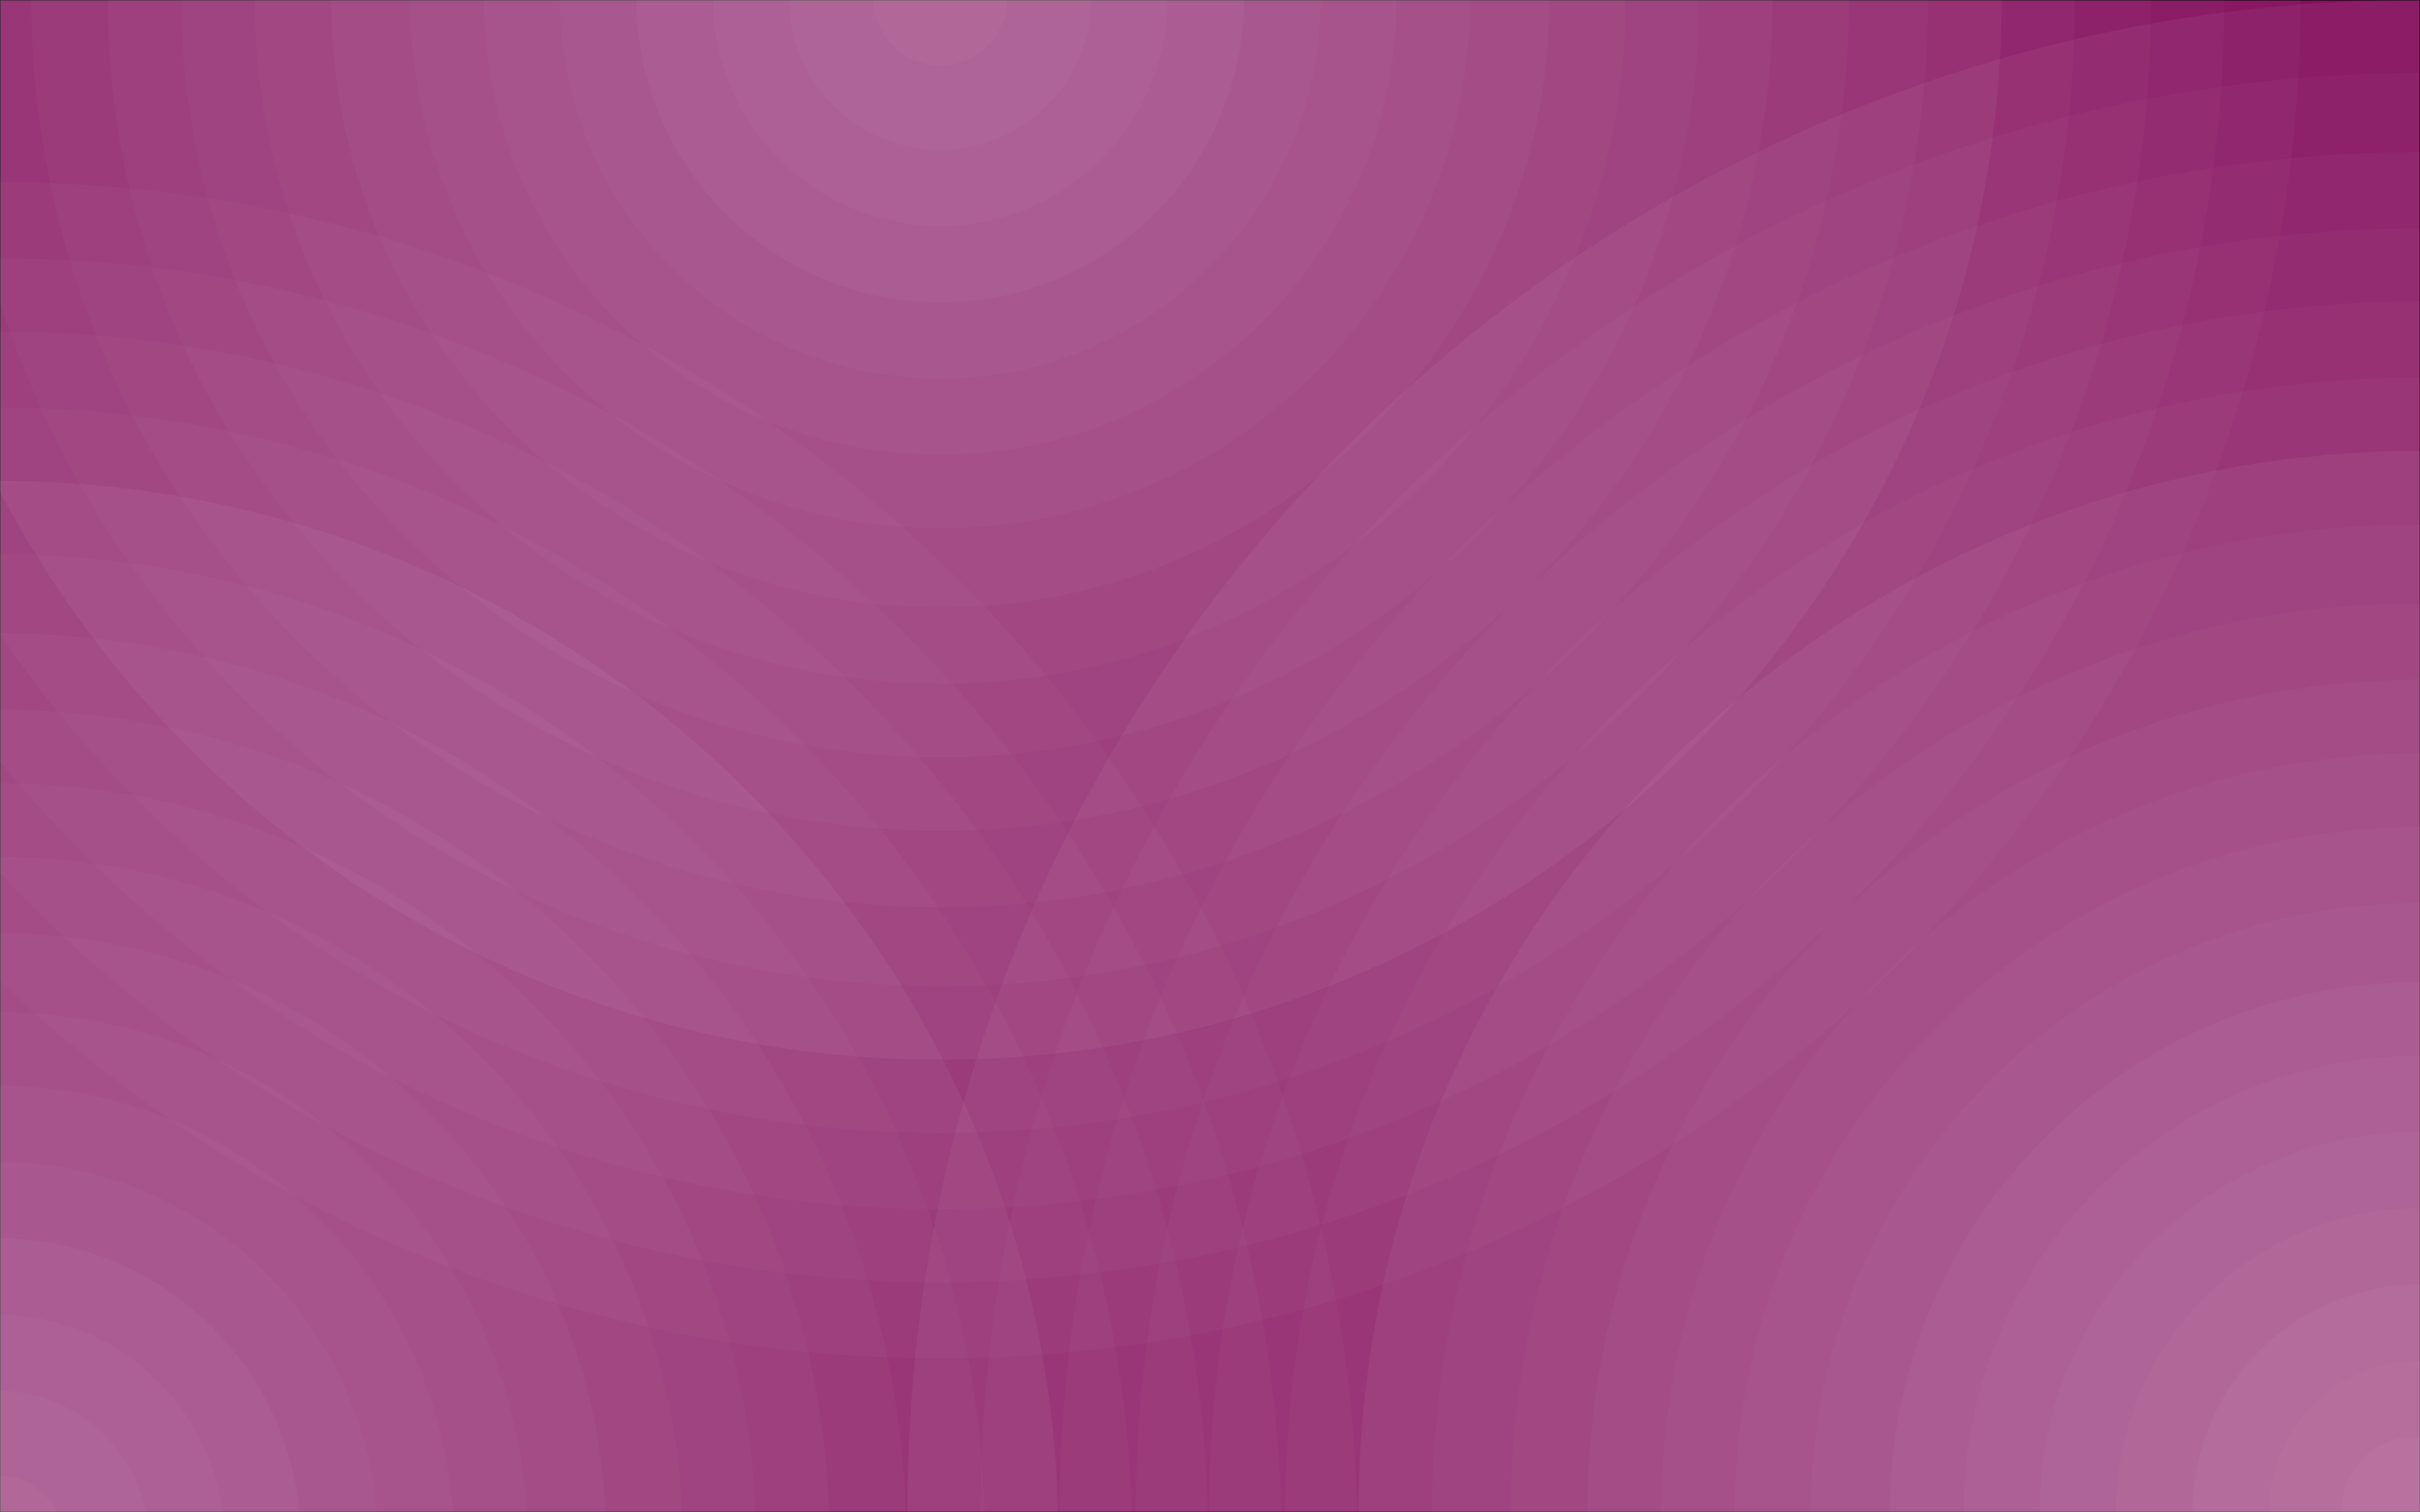 General 2560x1600 abstract pattern pink background texture